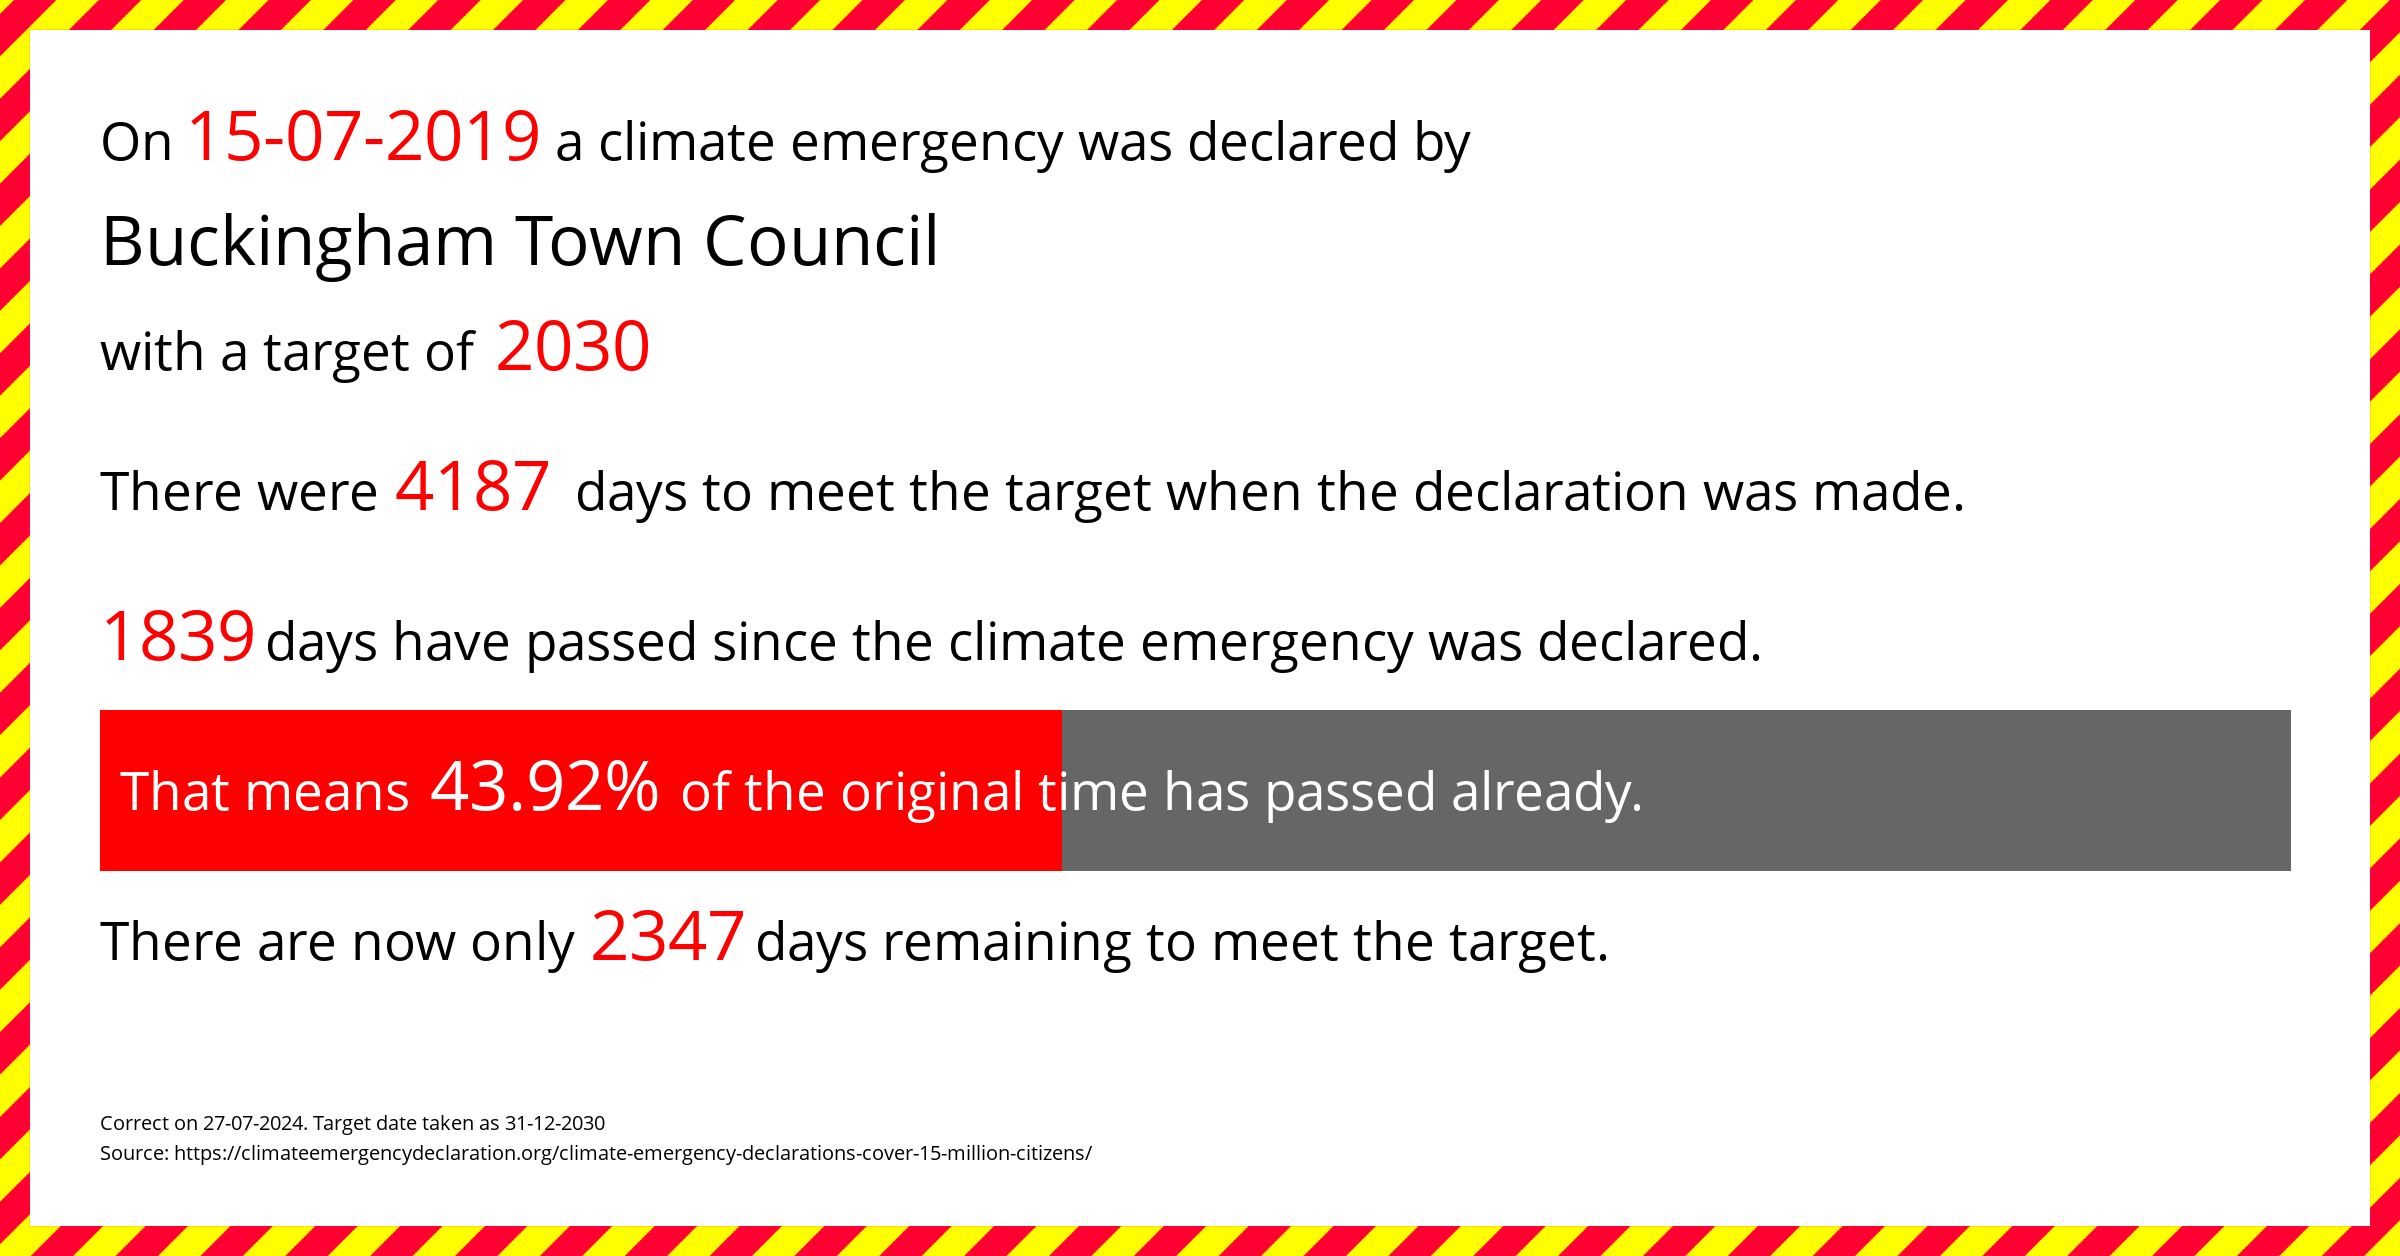 Buckingham Town Council declared a Climate emergency on Monday 15th July 2019, with a target of 2030.